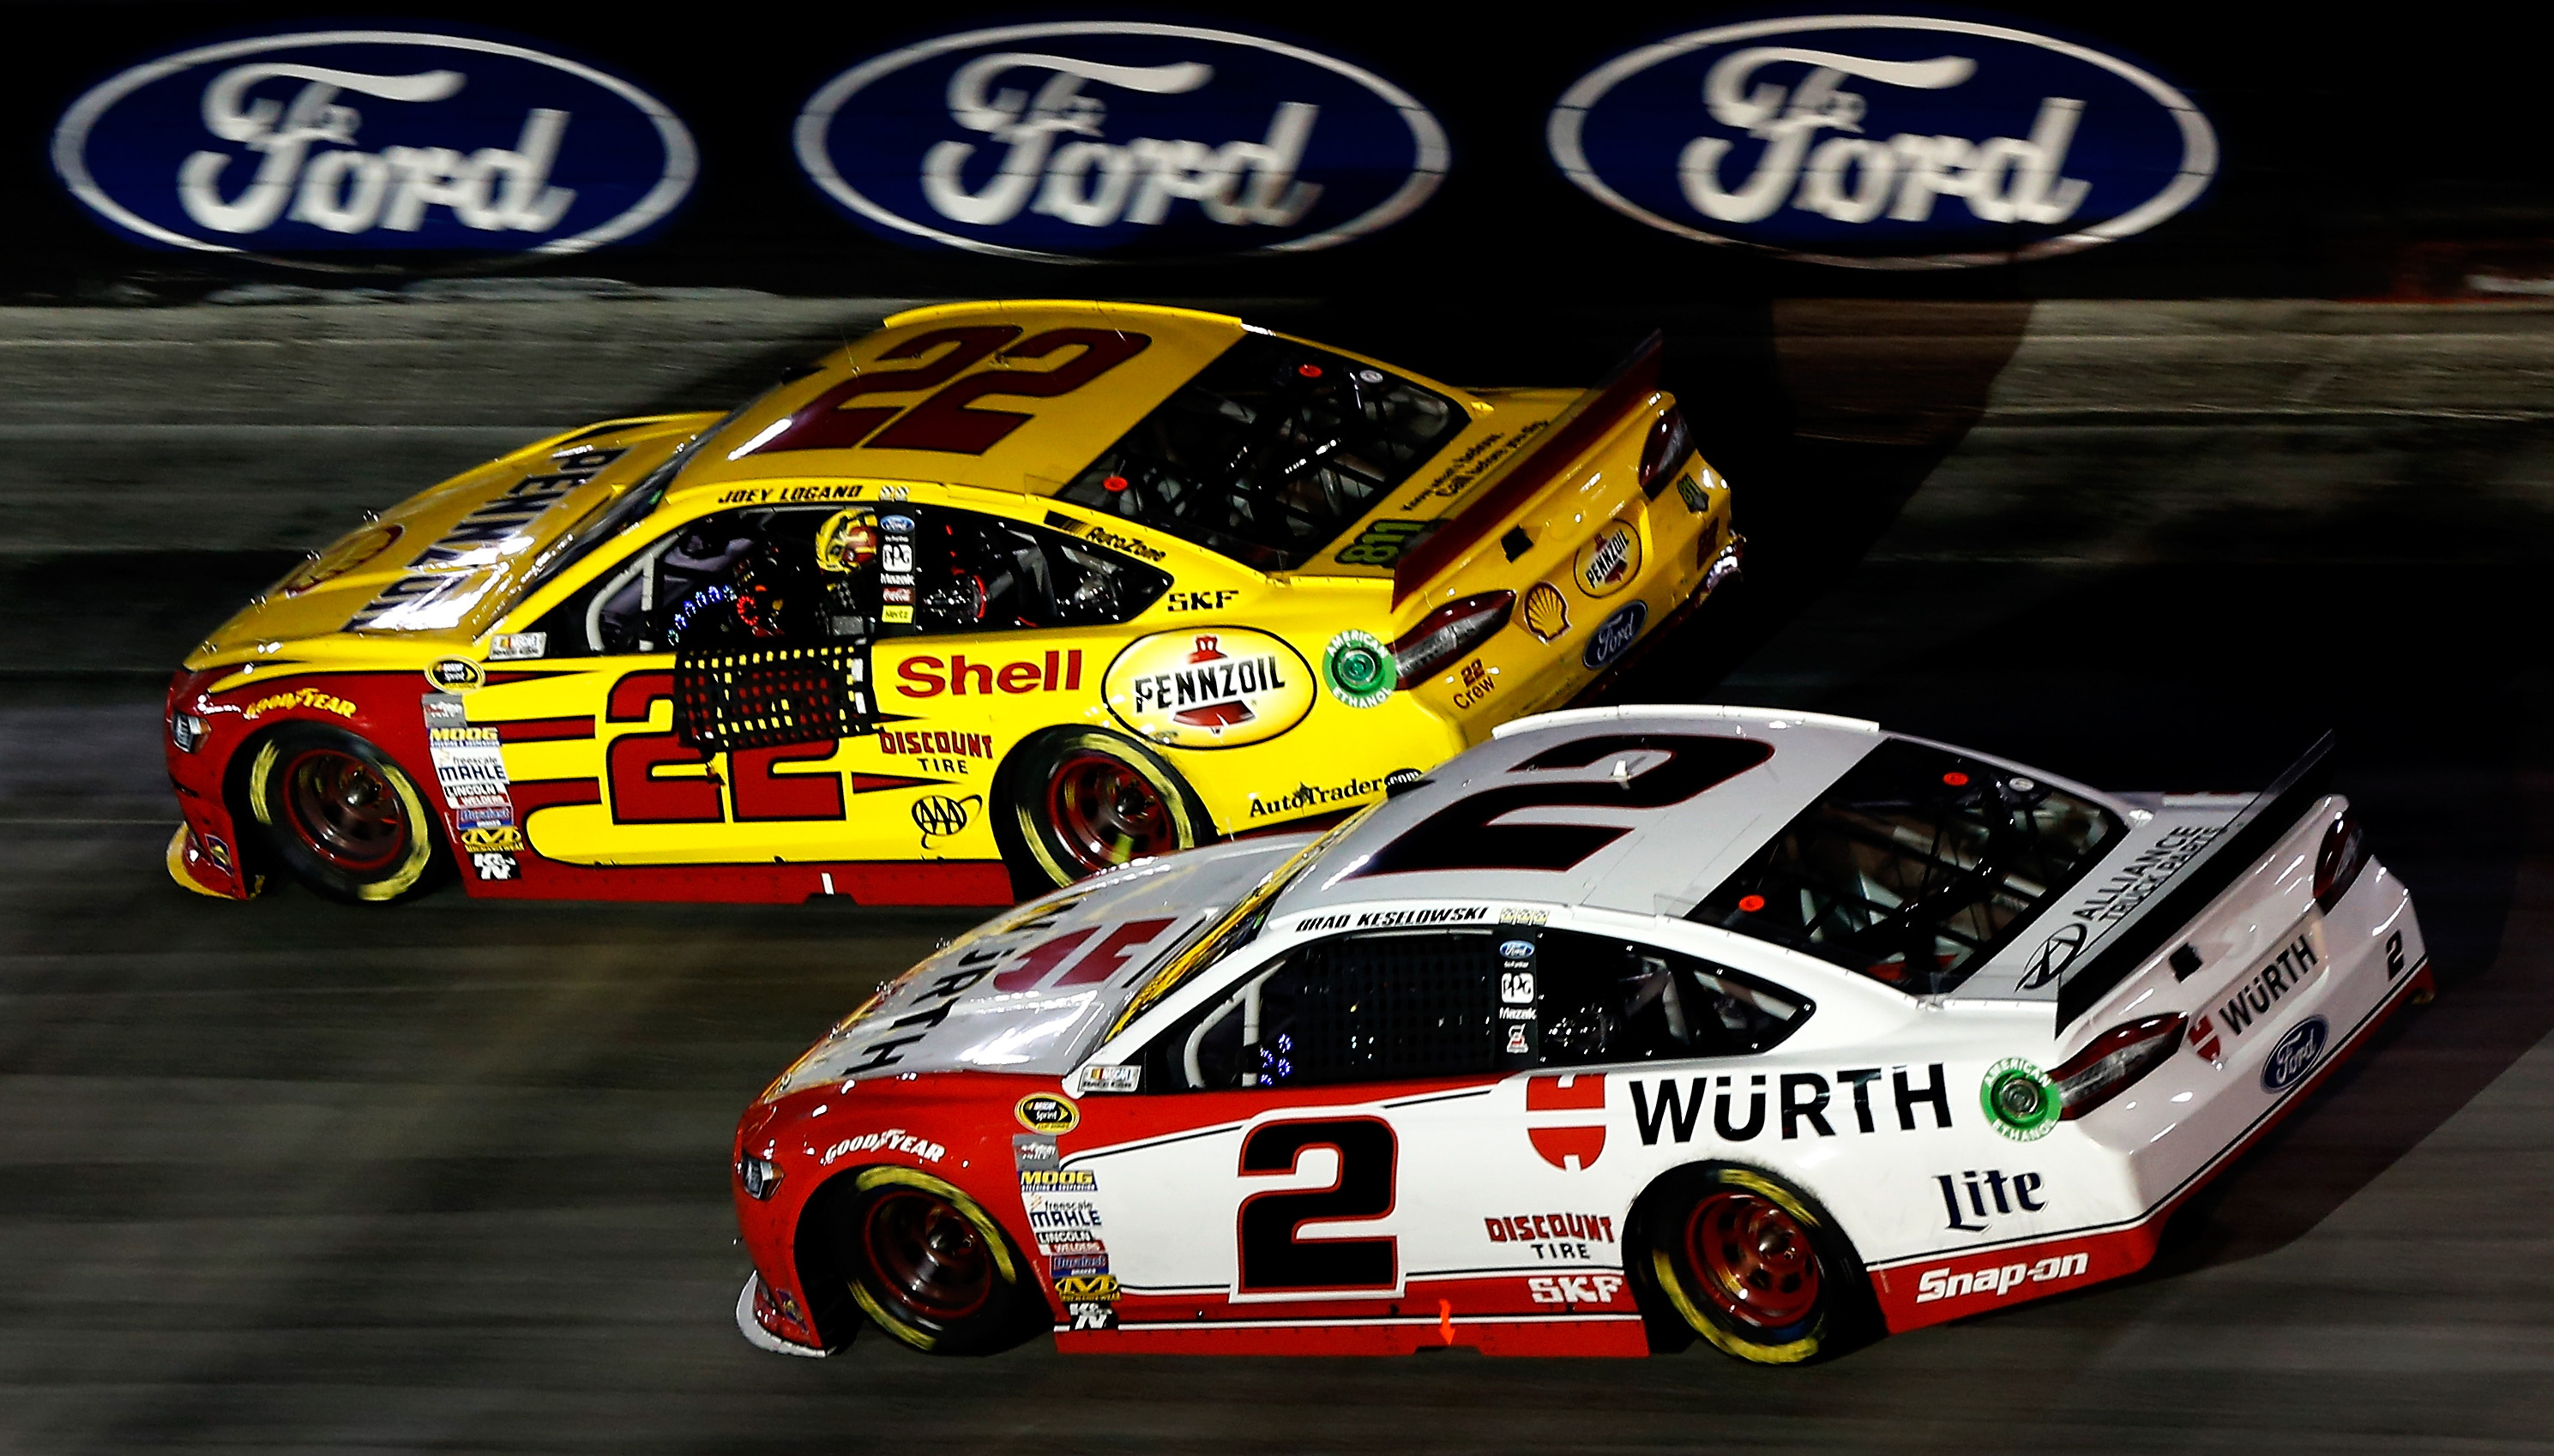 With 1-2 Bristol finish, is Team Penske now the 2014 title favorite?